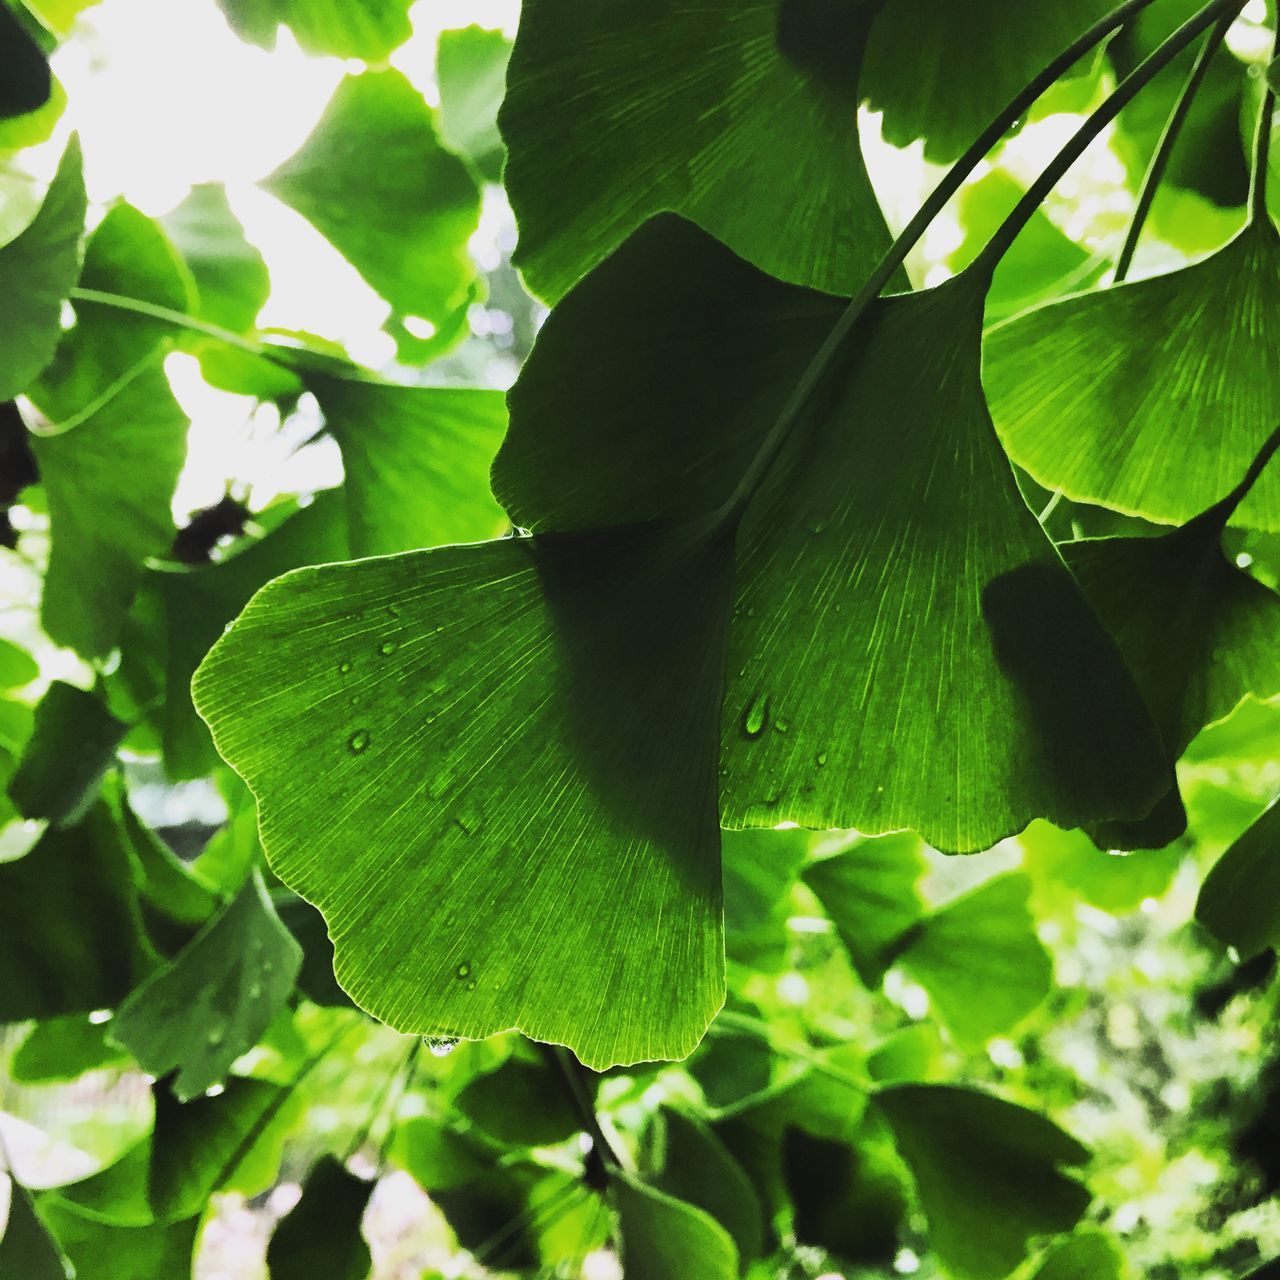 leaf, green color, growth, leaf vein, plant, close-up, nature, freshness, leaves, beauty in nature, natural pattern, green, full frame, day, sunlight, tree, no people, focus on foreground, outdoors, backgrounds